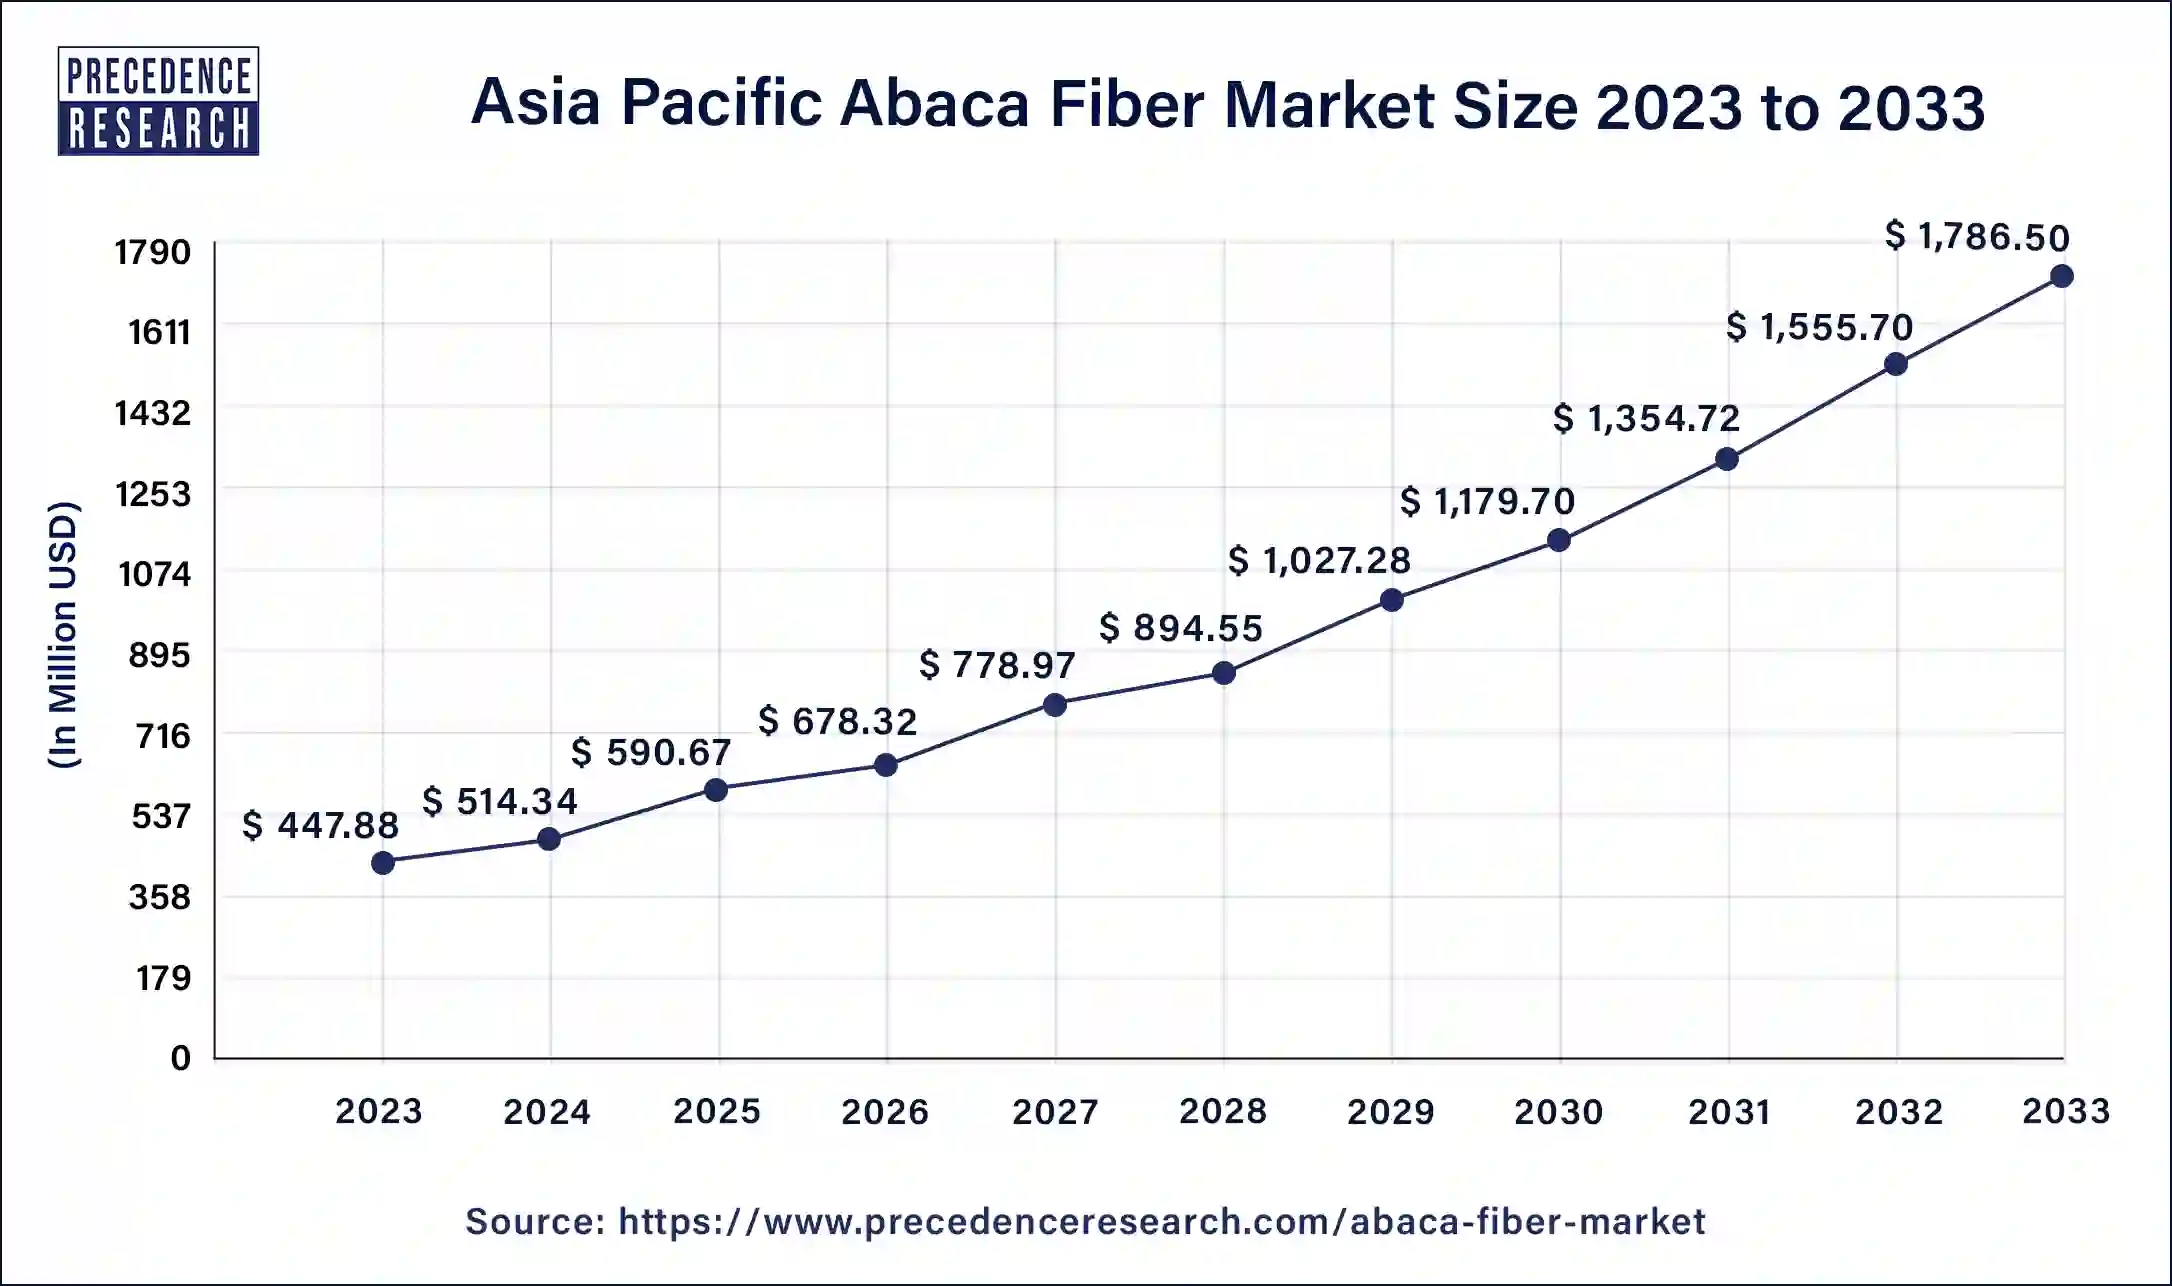 Asia Pacific Abaca Fiber Market Size 2024 to 2033